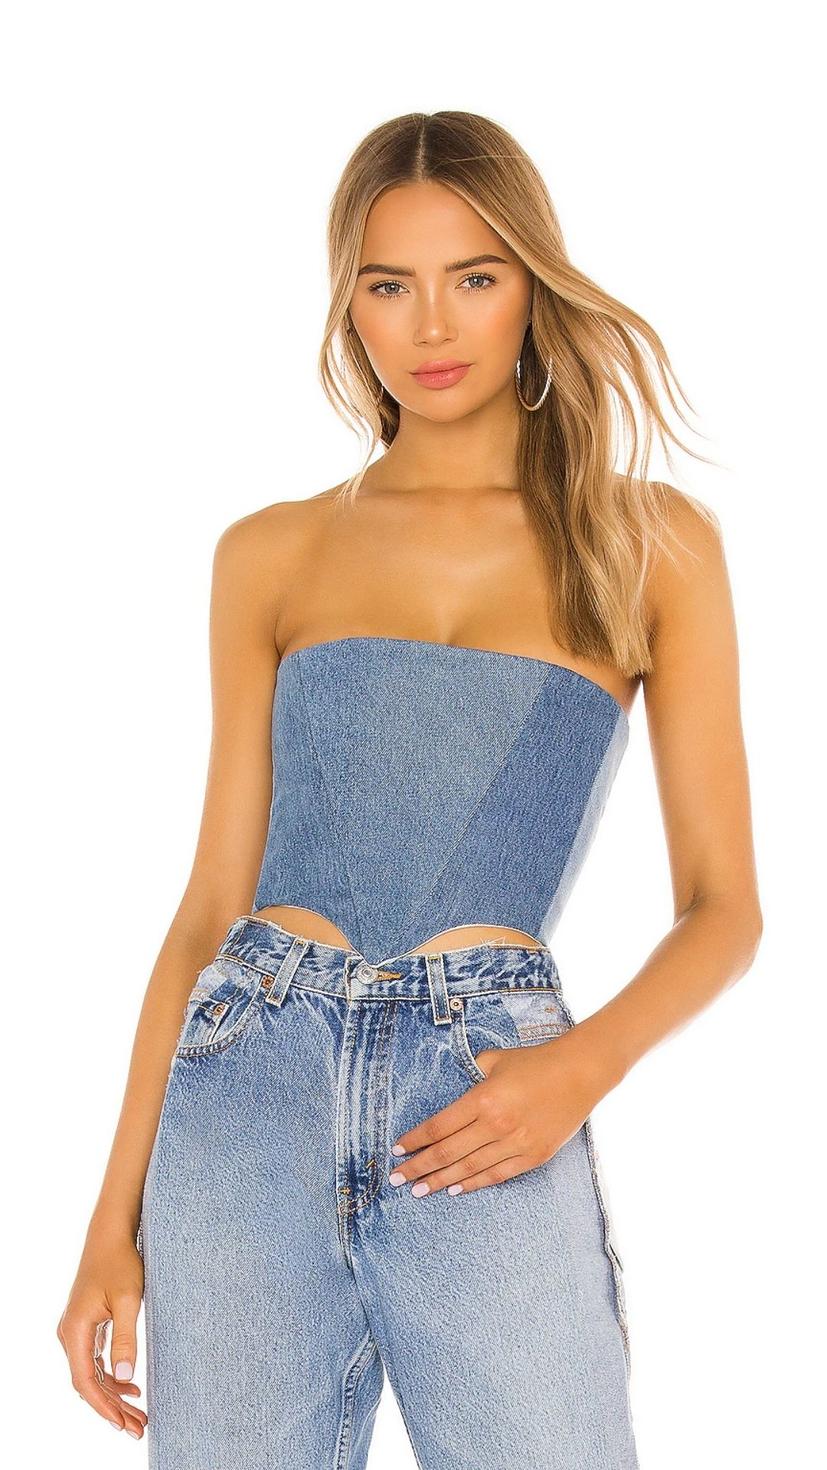 8 corset tops that will help you step up your fashion game 